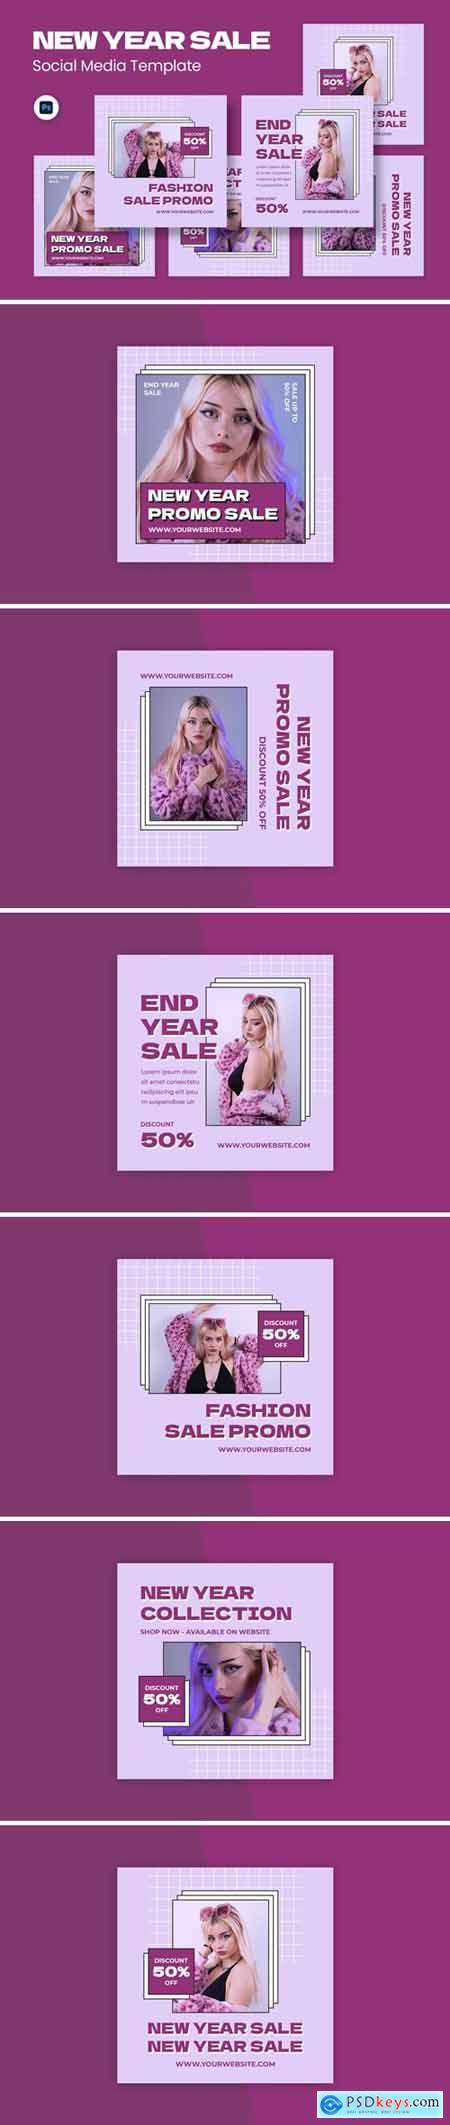 New Year Sale Template